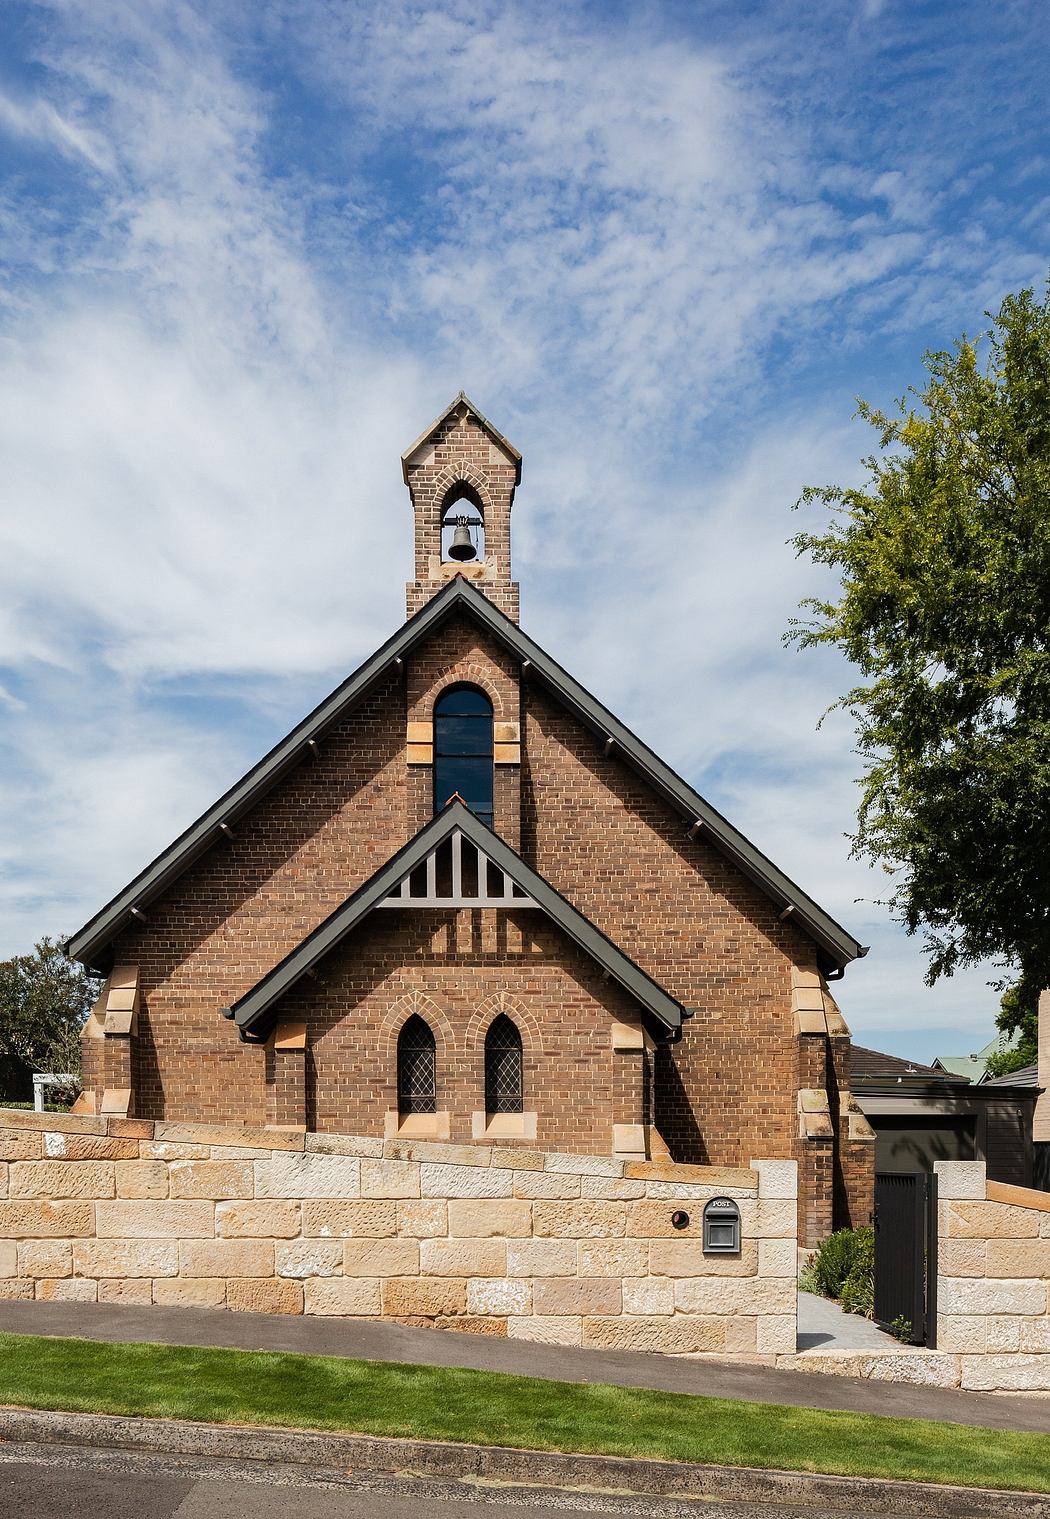 A brick church with a bell tower and arched windows, set against a blue sky and surrounded by trees.